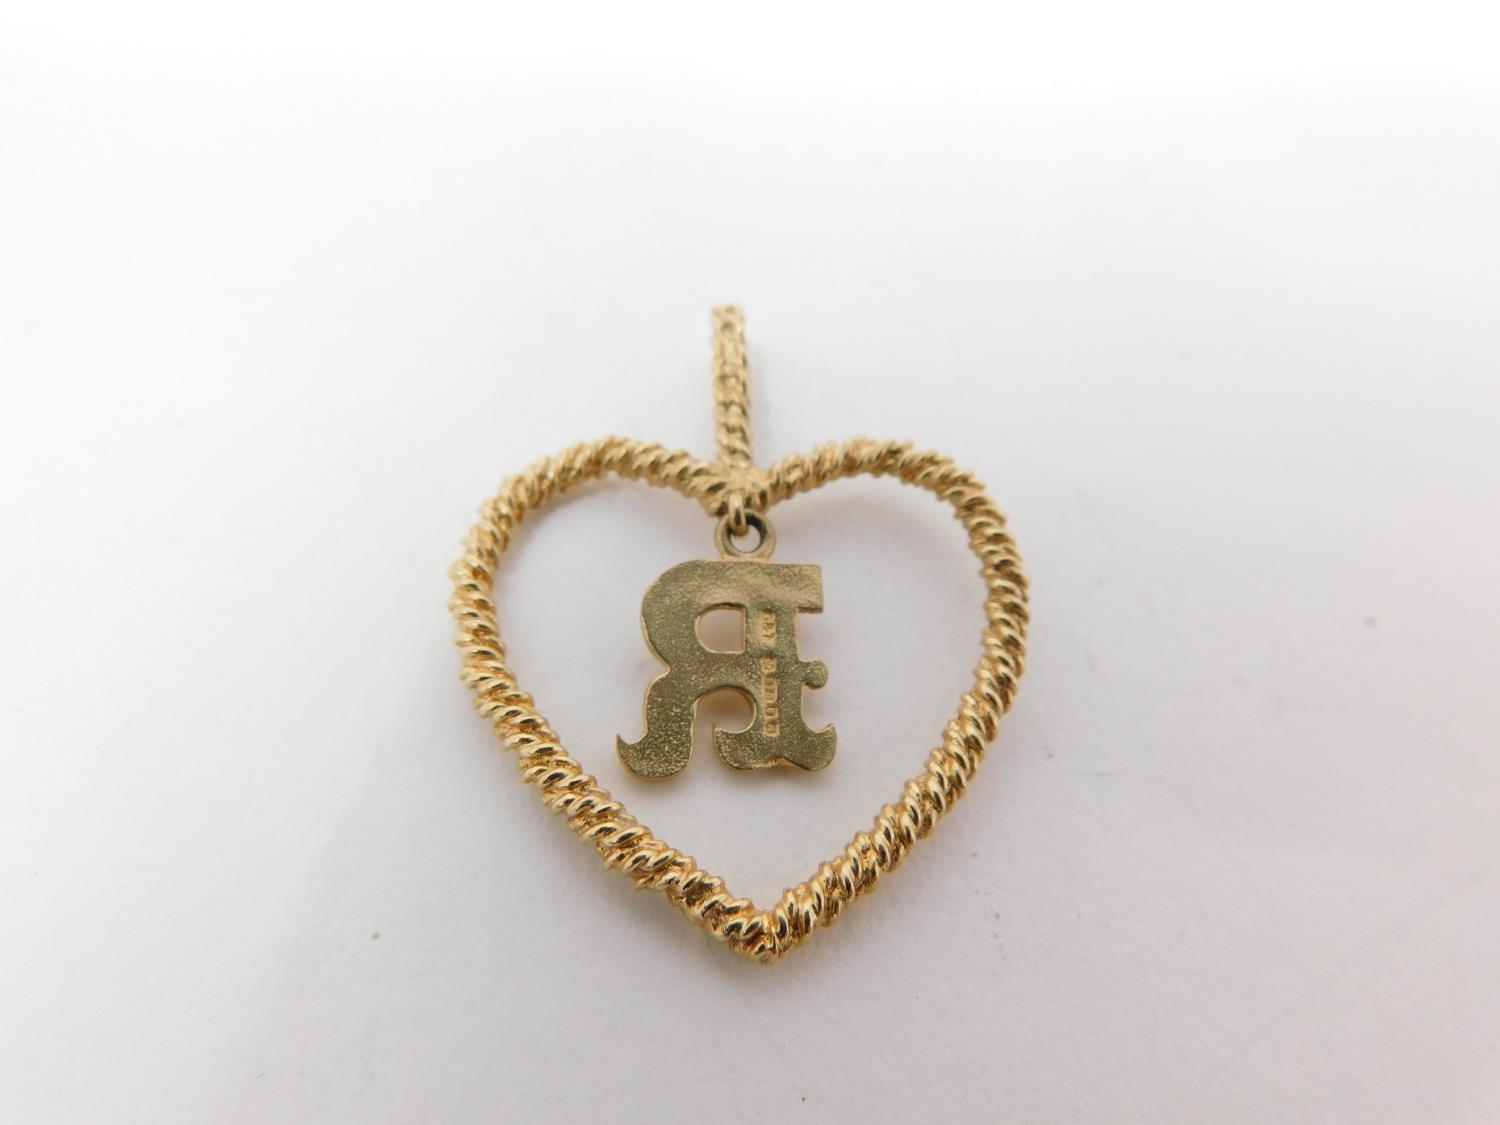 A 9carat gold chain with yellow metal dice charm and three 9 carat gold pendants. One pendant - Image 7 of 11